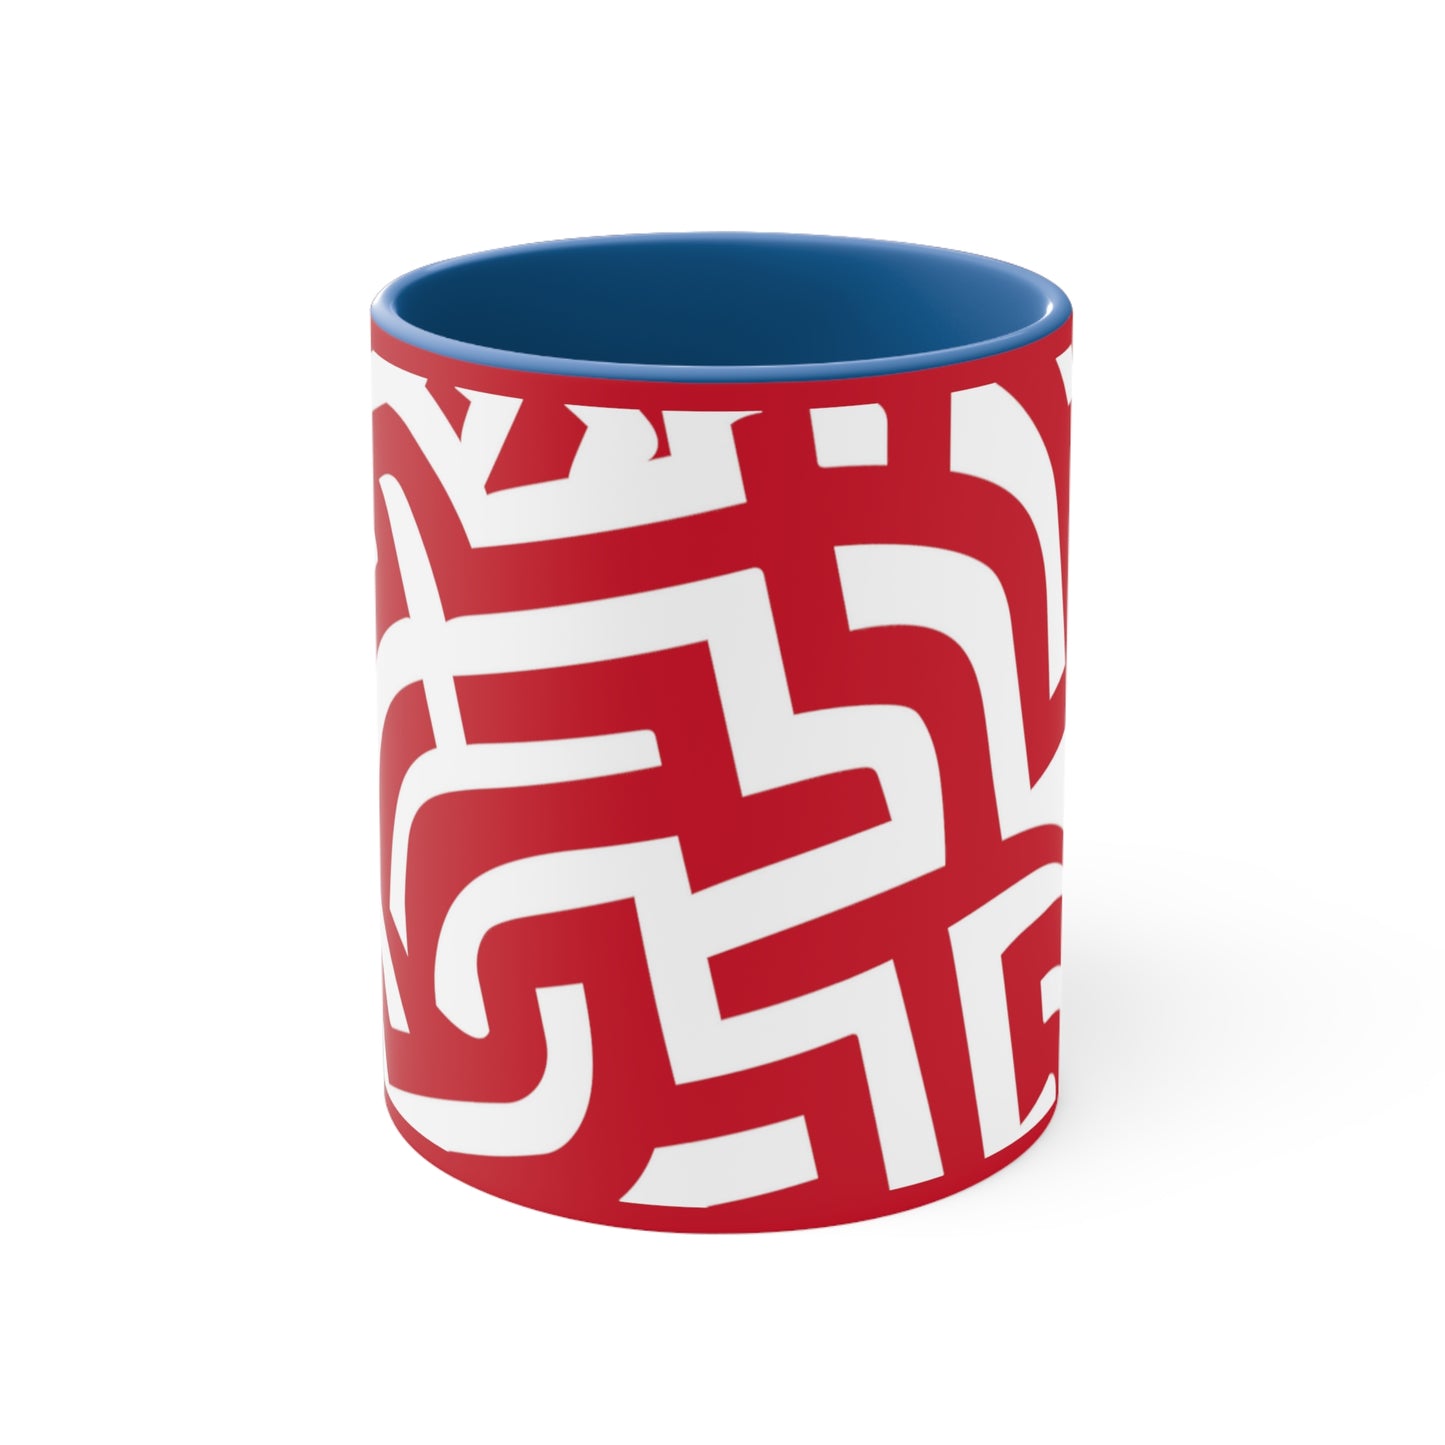 Maze 2 in Red